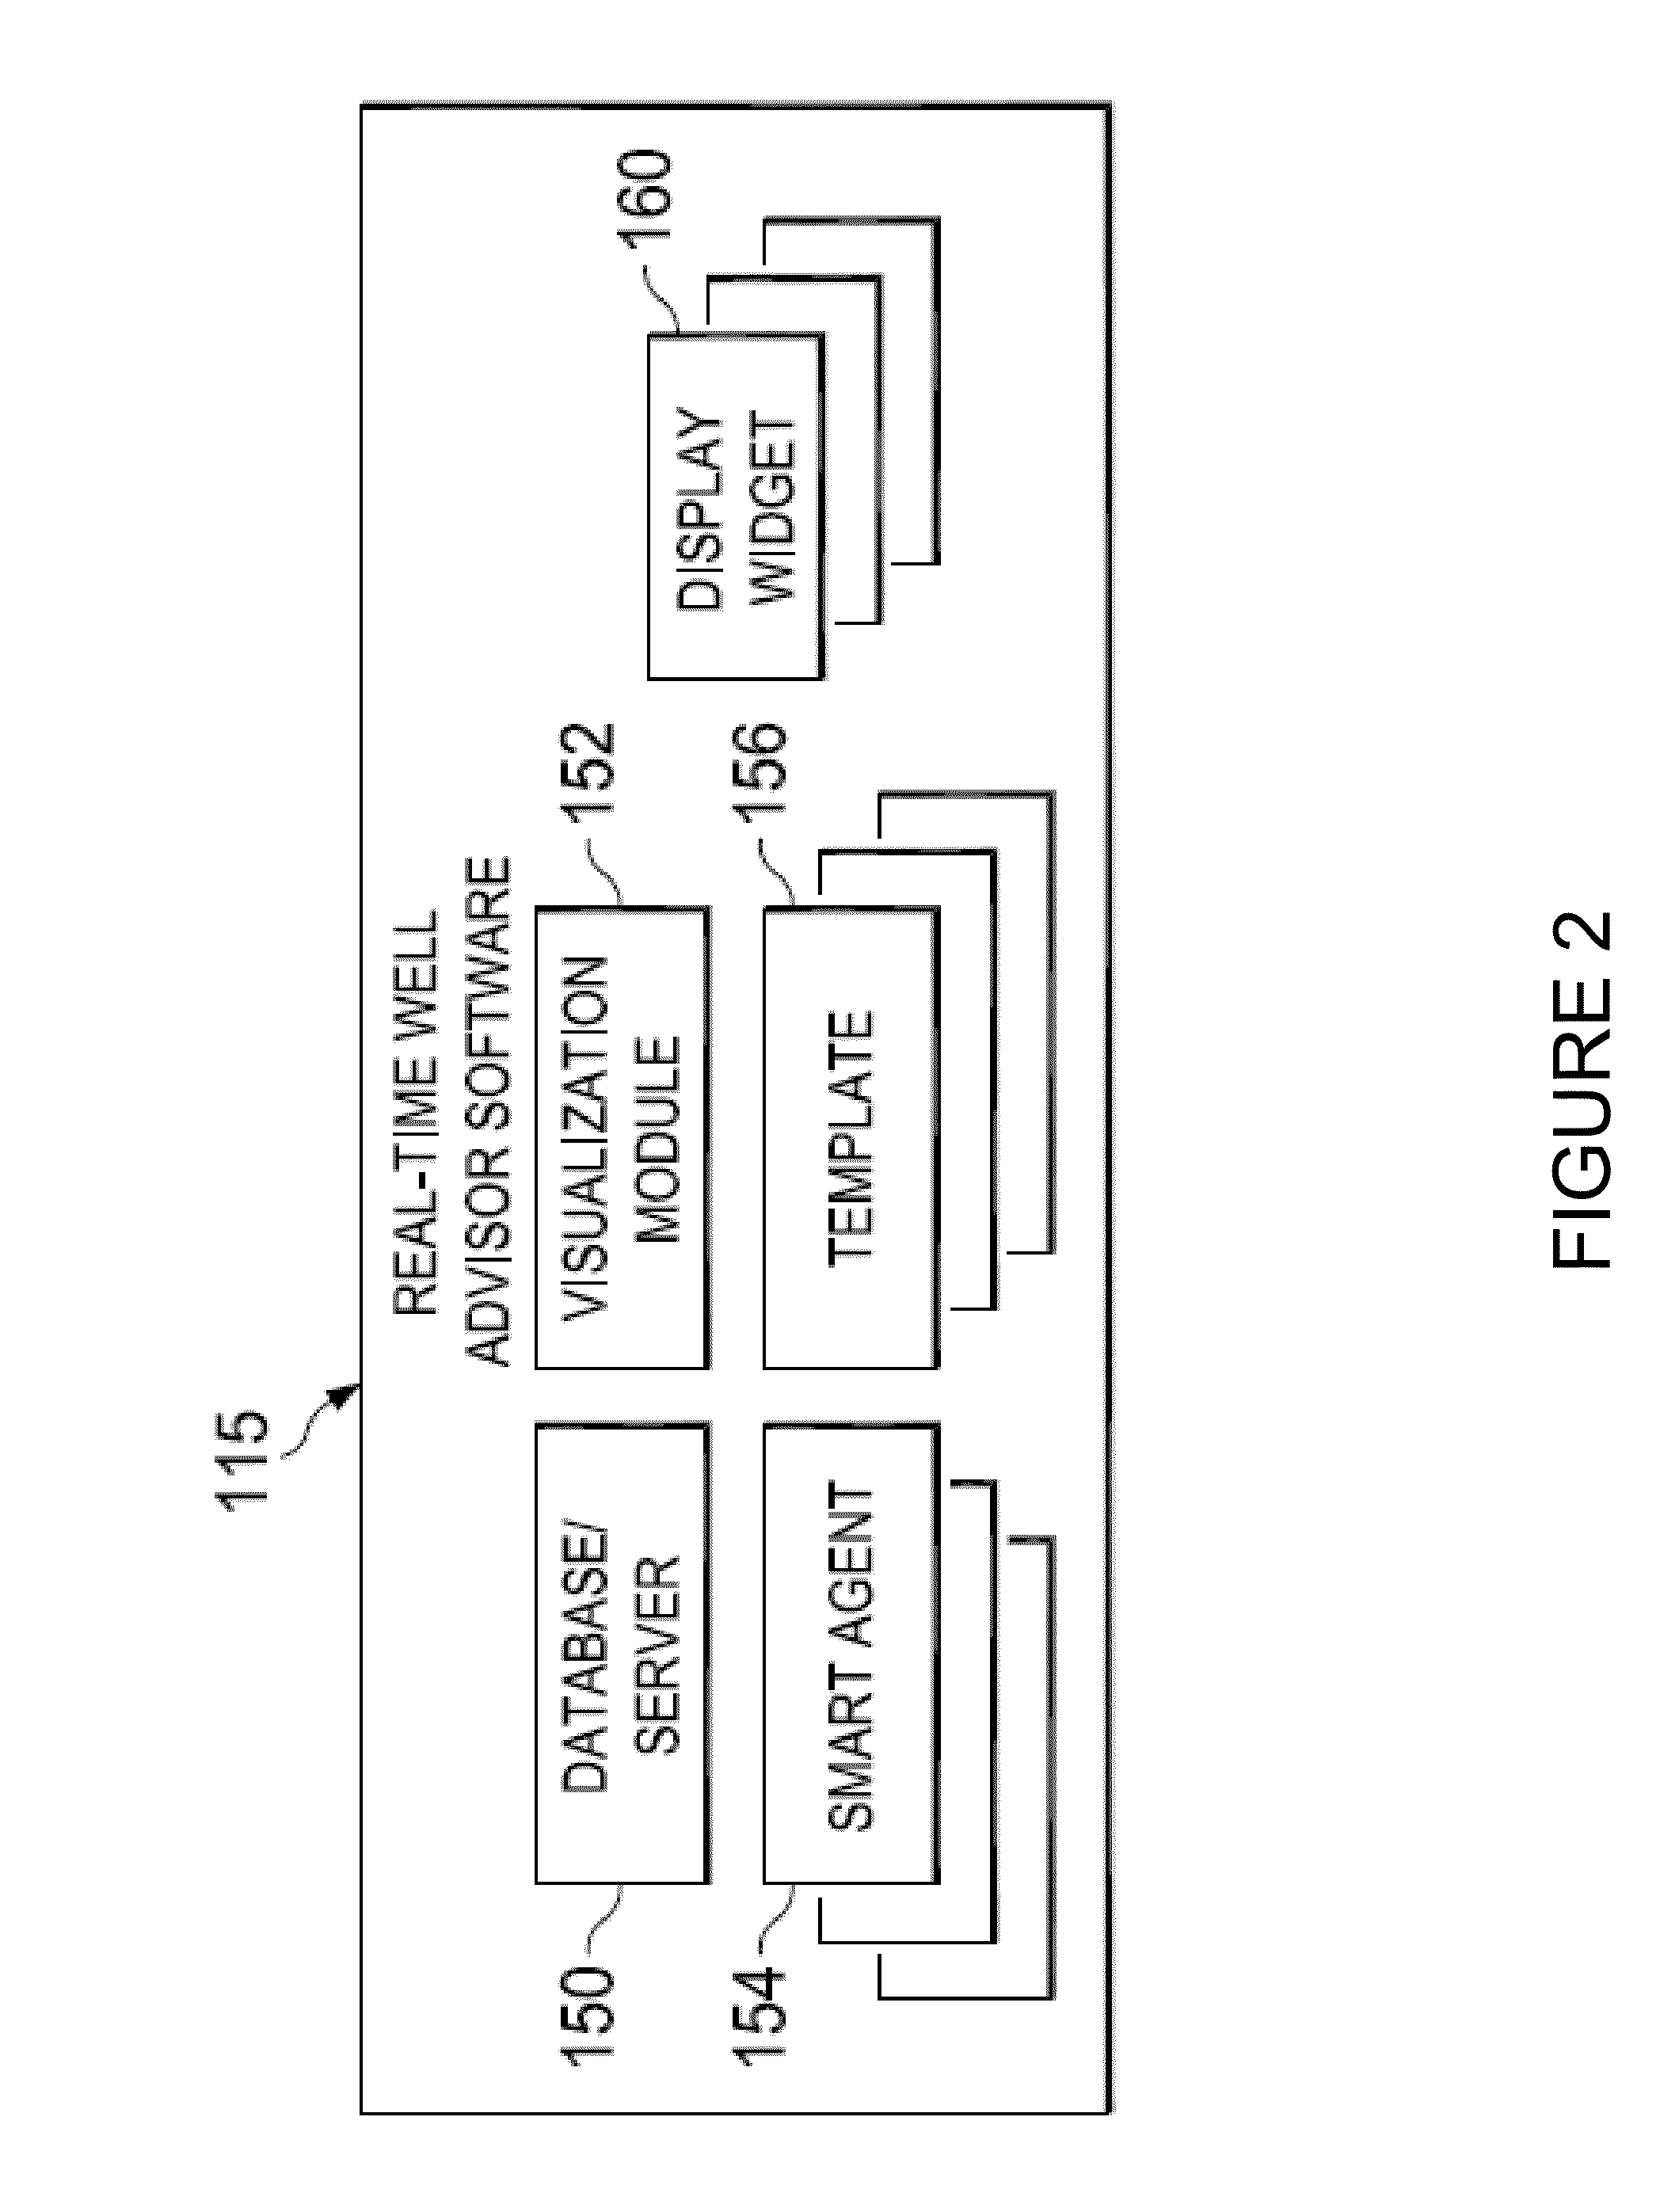 System and console for monitoring and managing well site operations